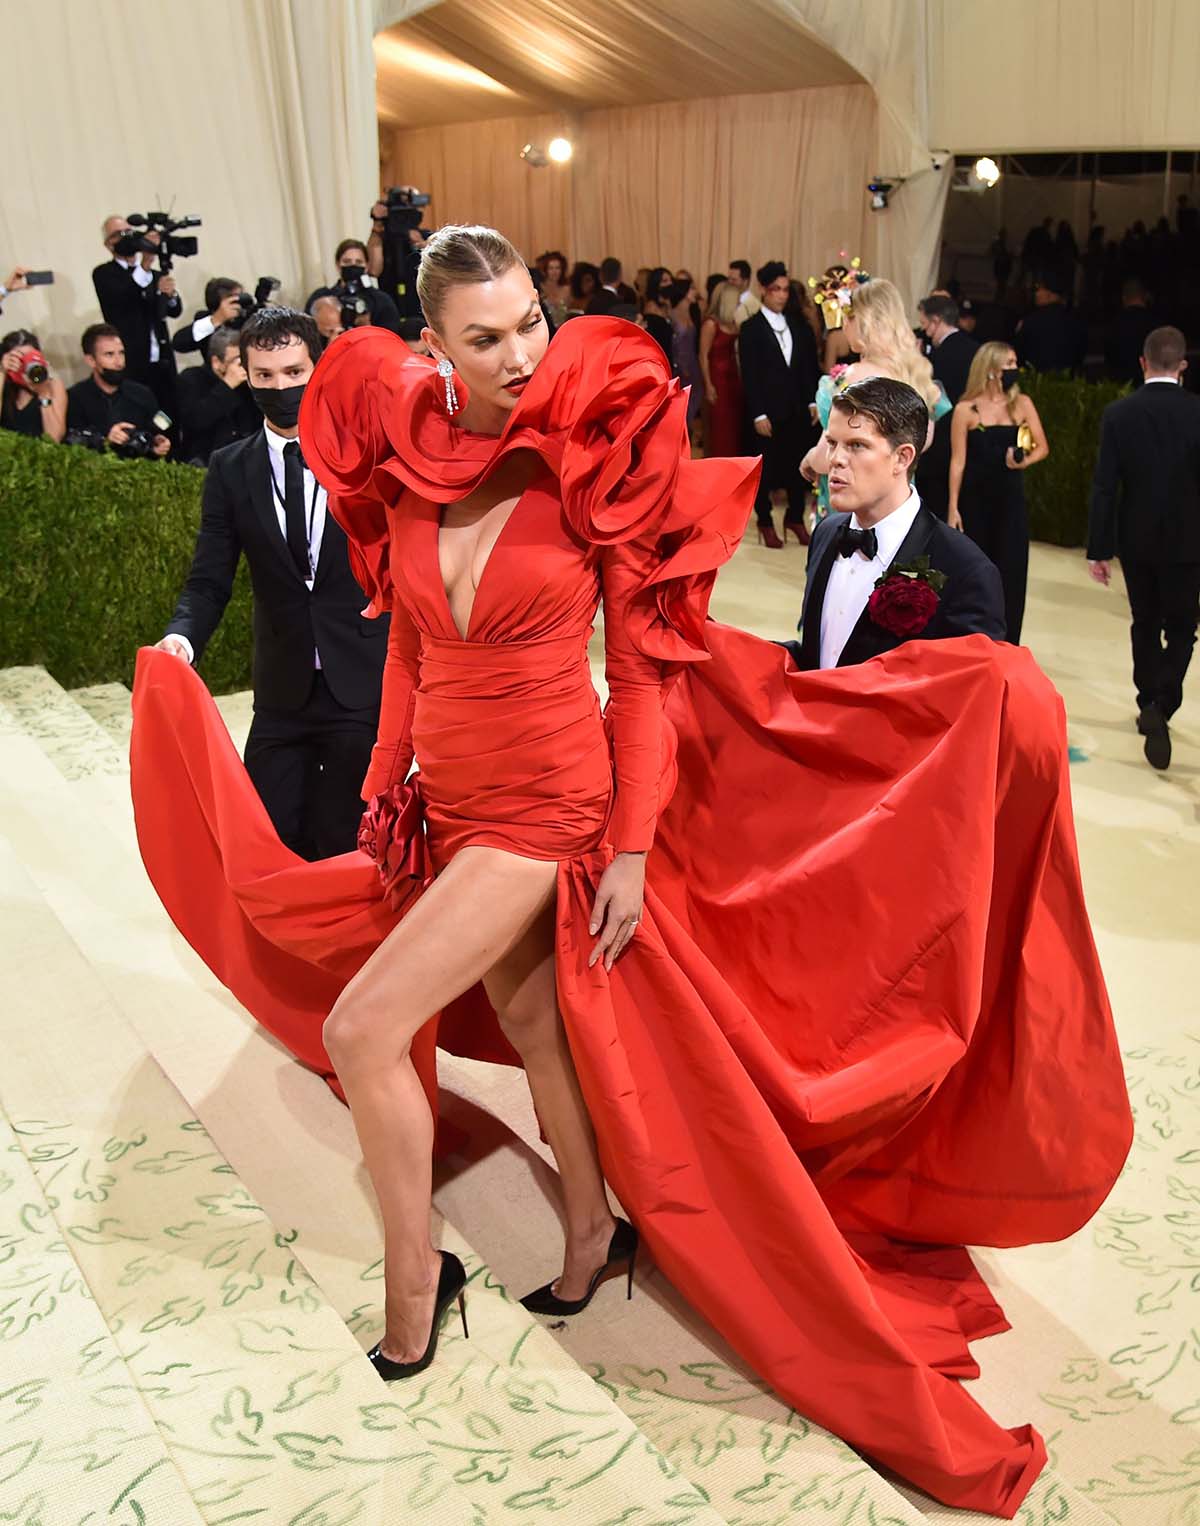 The 2022 Met Gala Theme, Explained